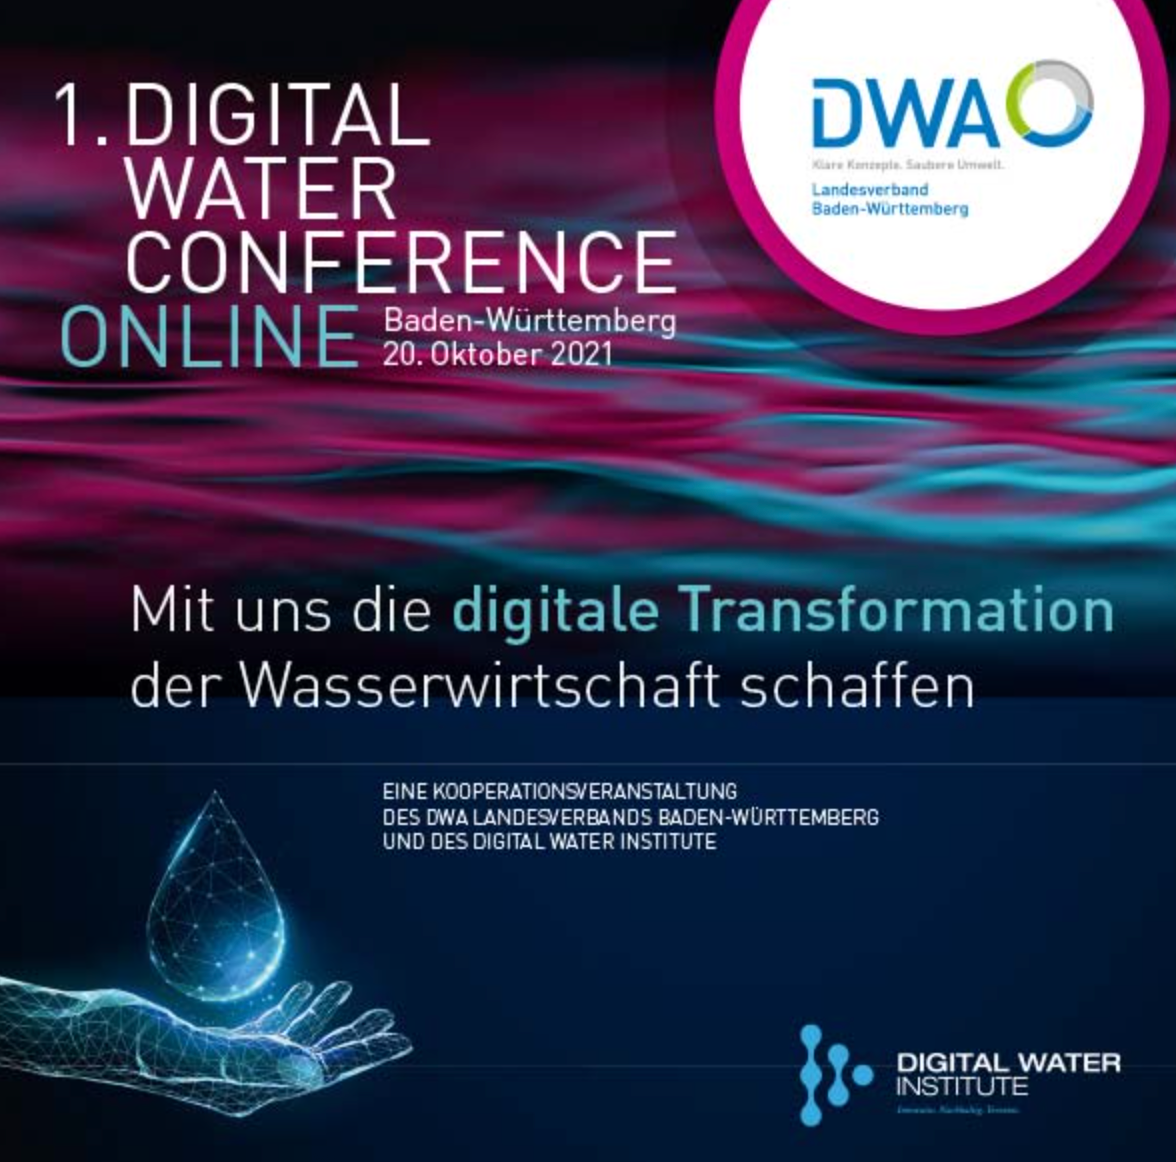 Digital Water Conference